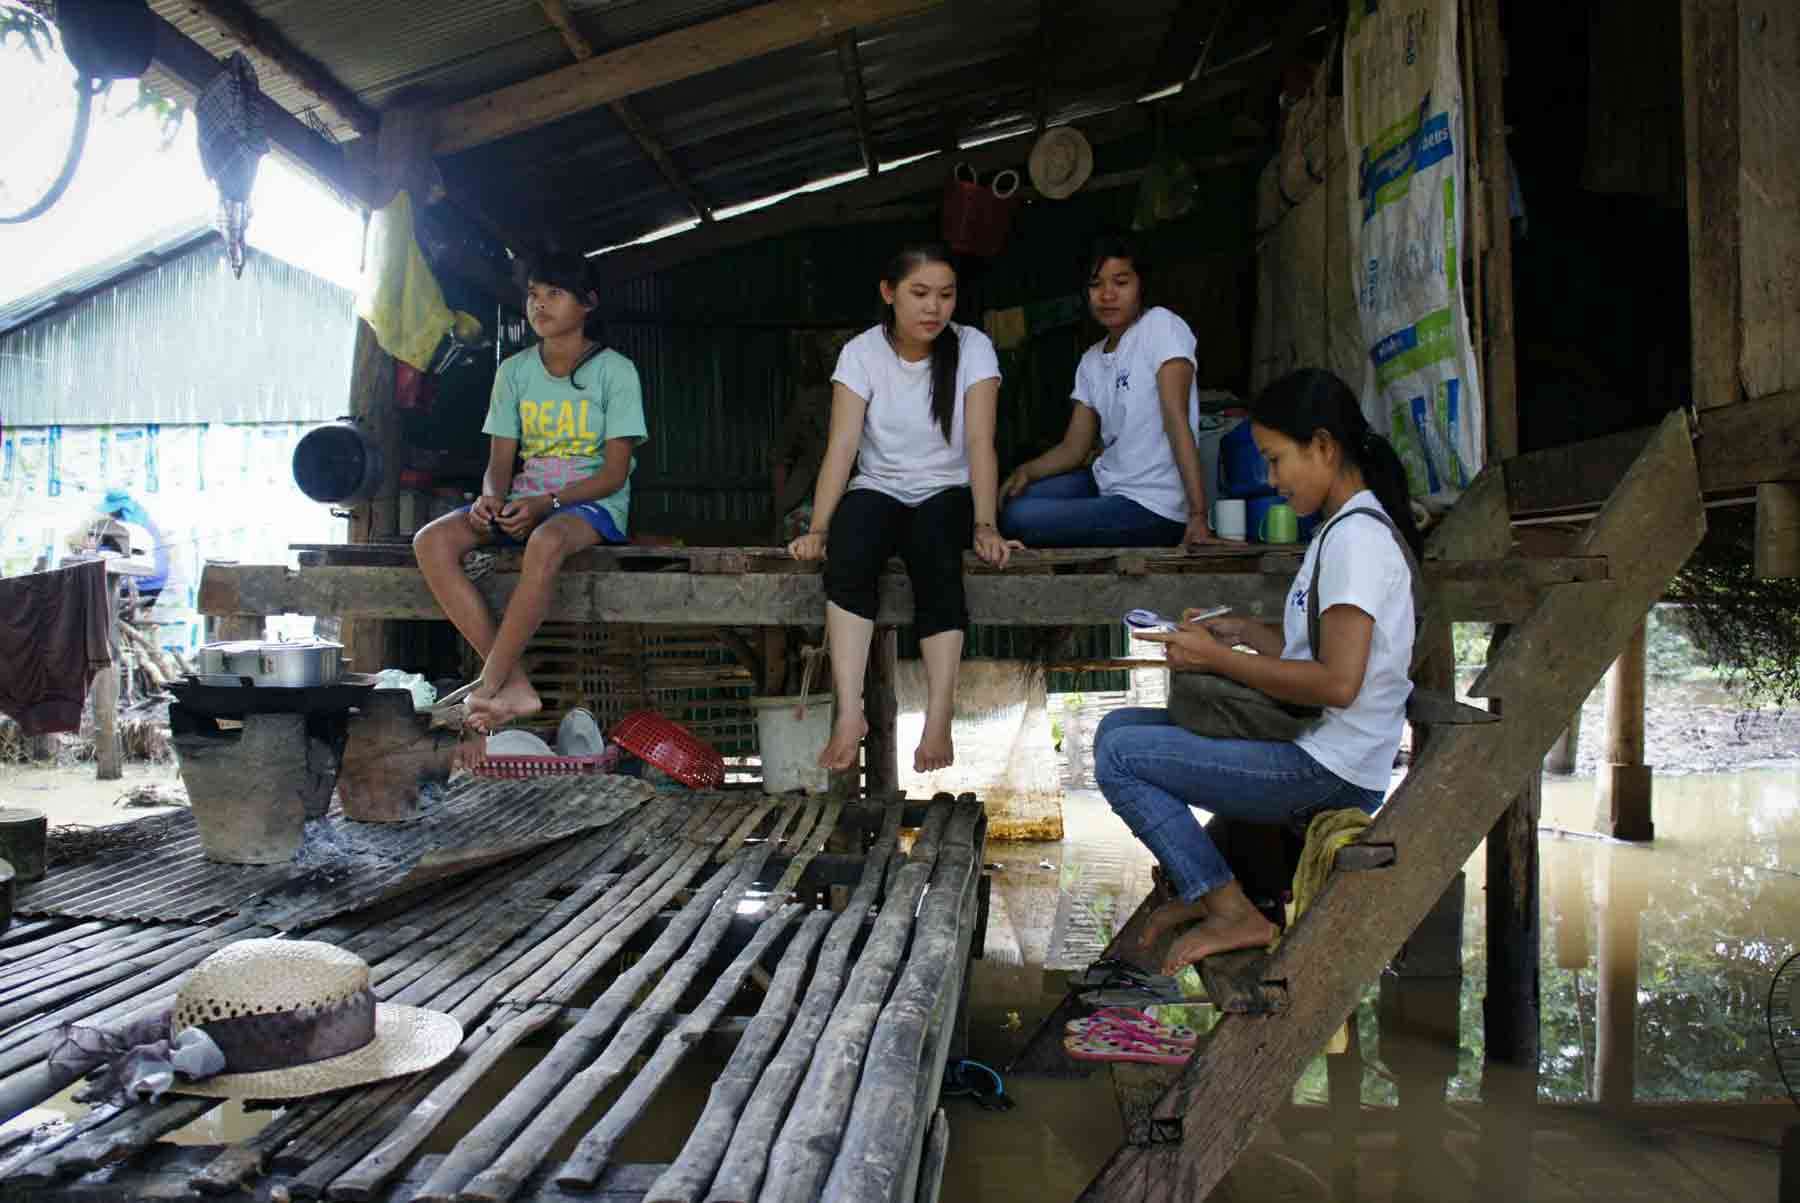 Our volunteers intervene in a village in Cambodia to help a child in a situation of serious abuse.